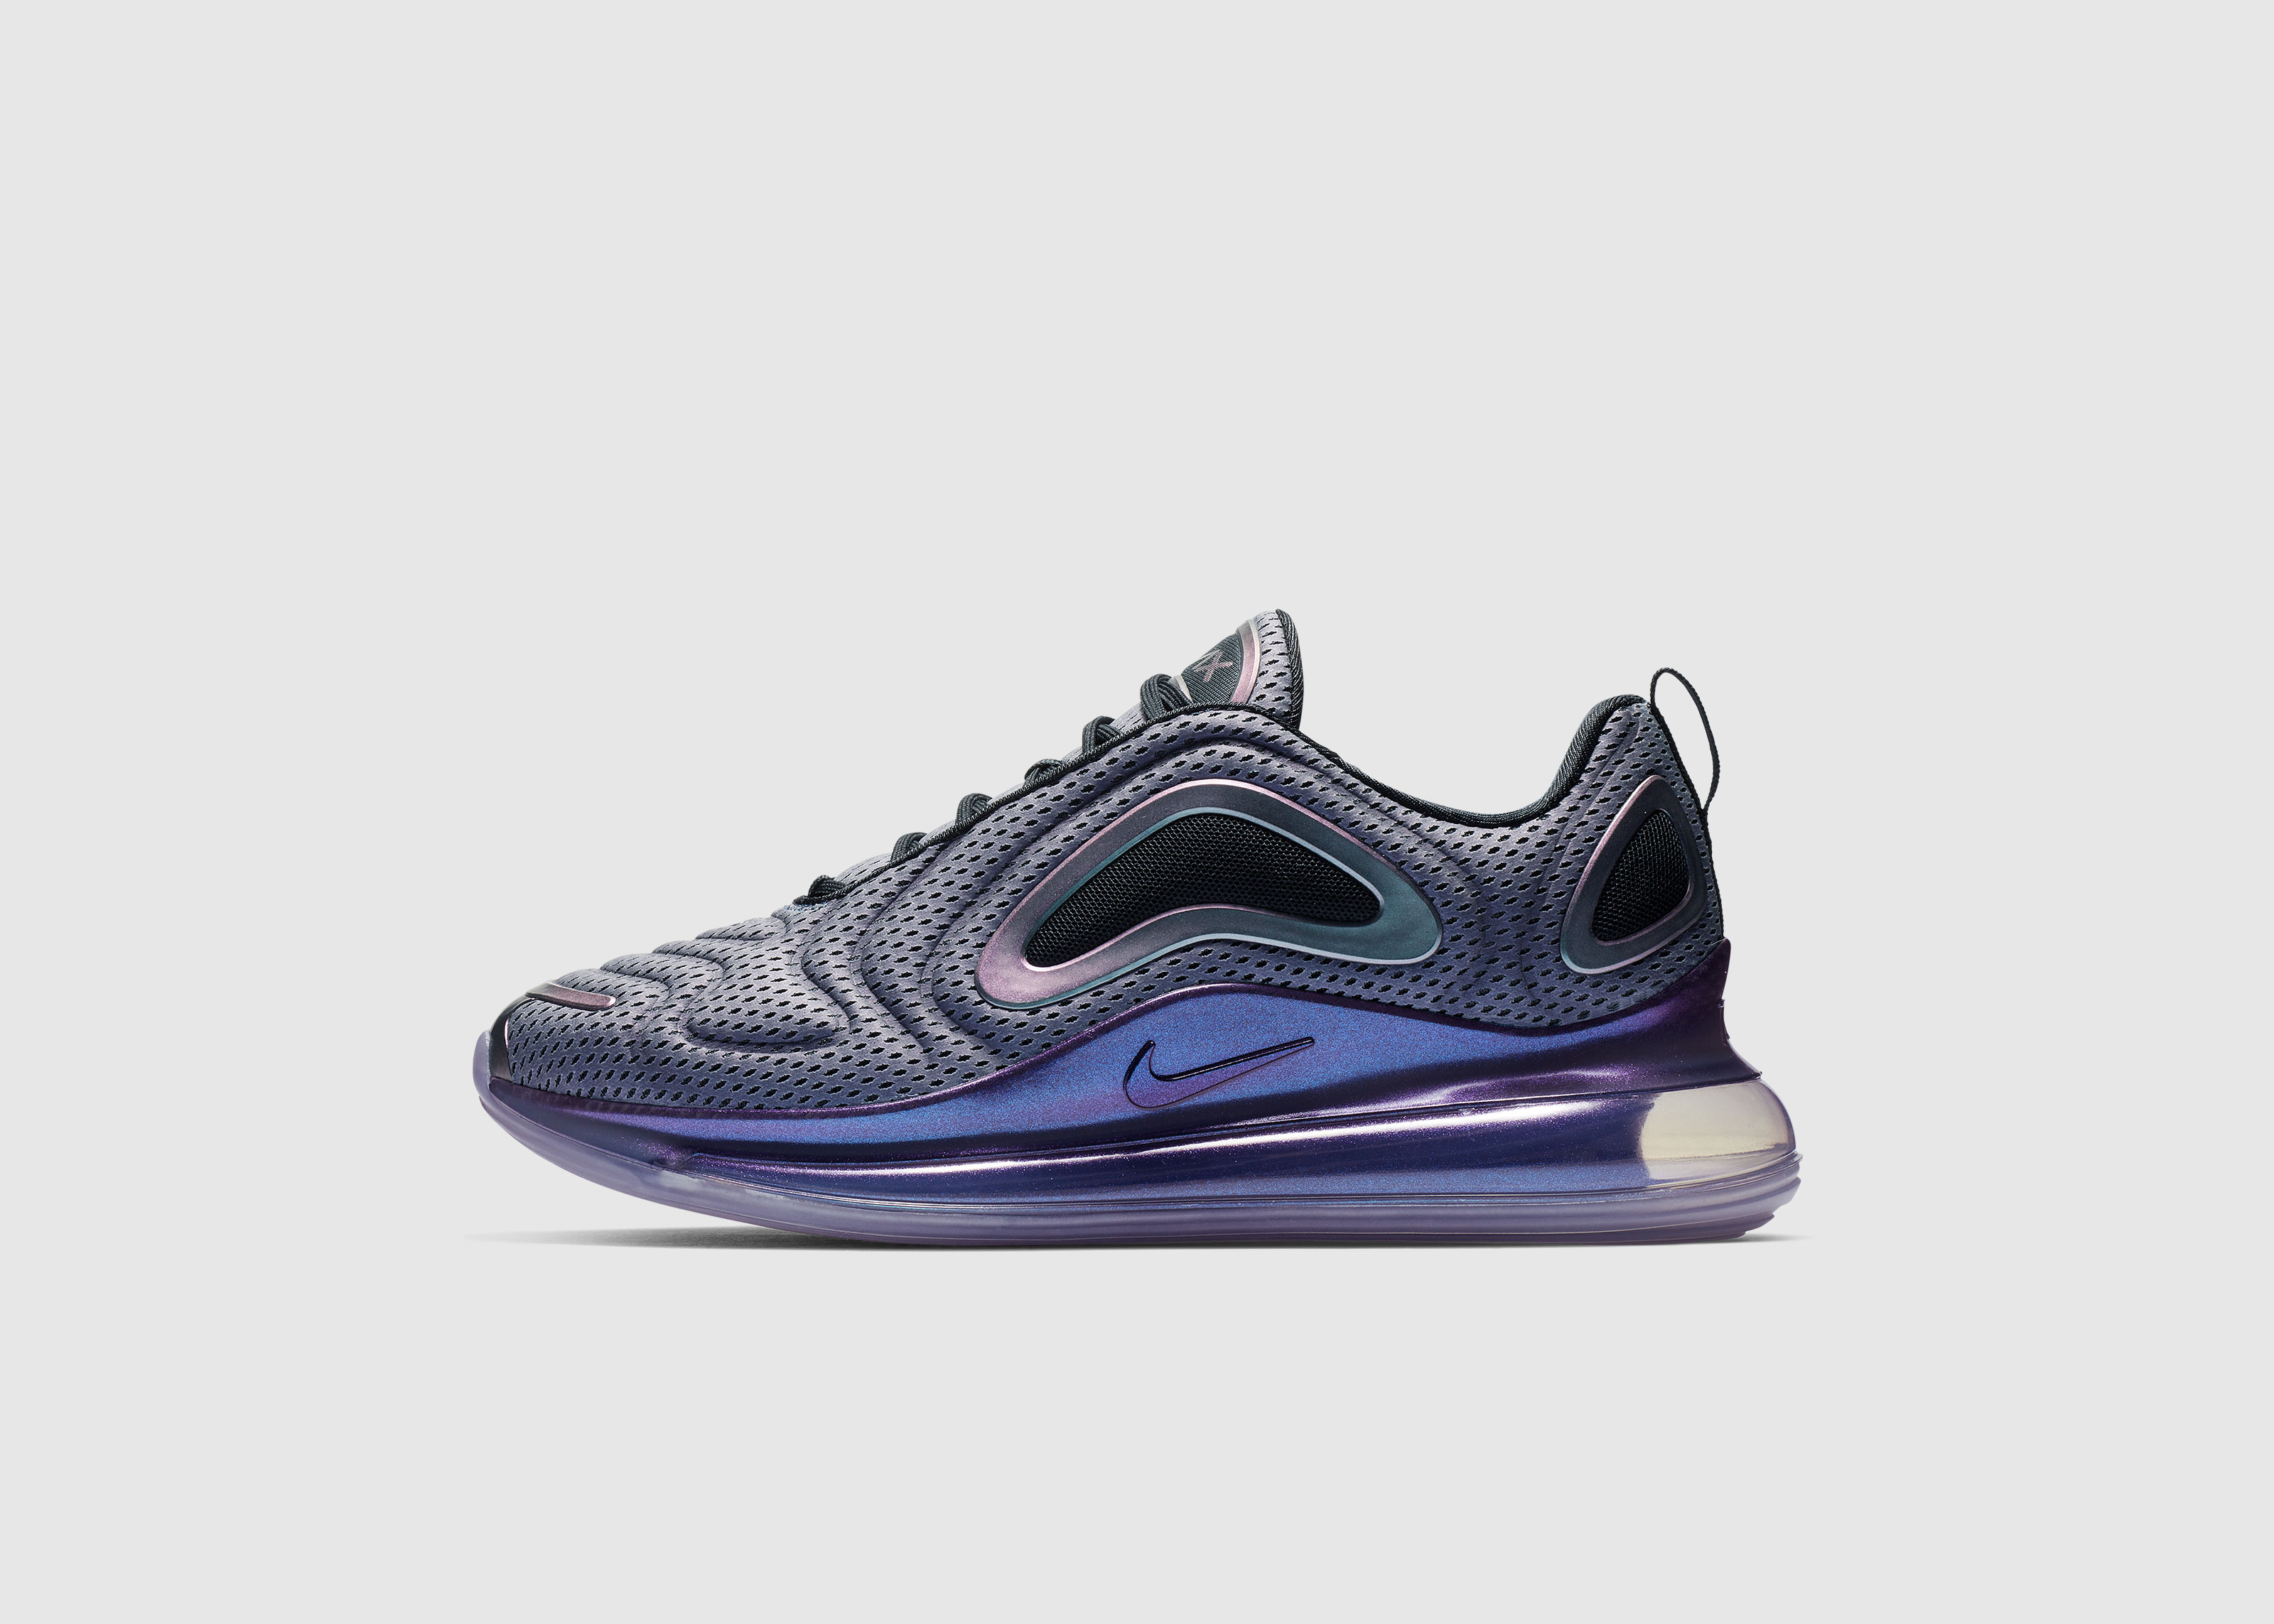 Nike Air Max 720 'Northern Lights Night' 2 - WearTesters